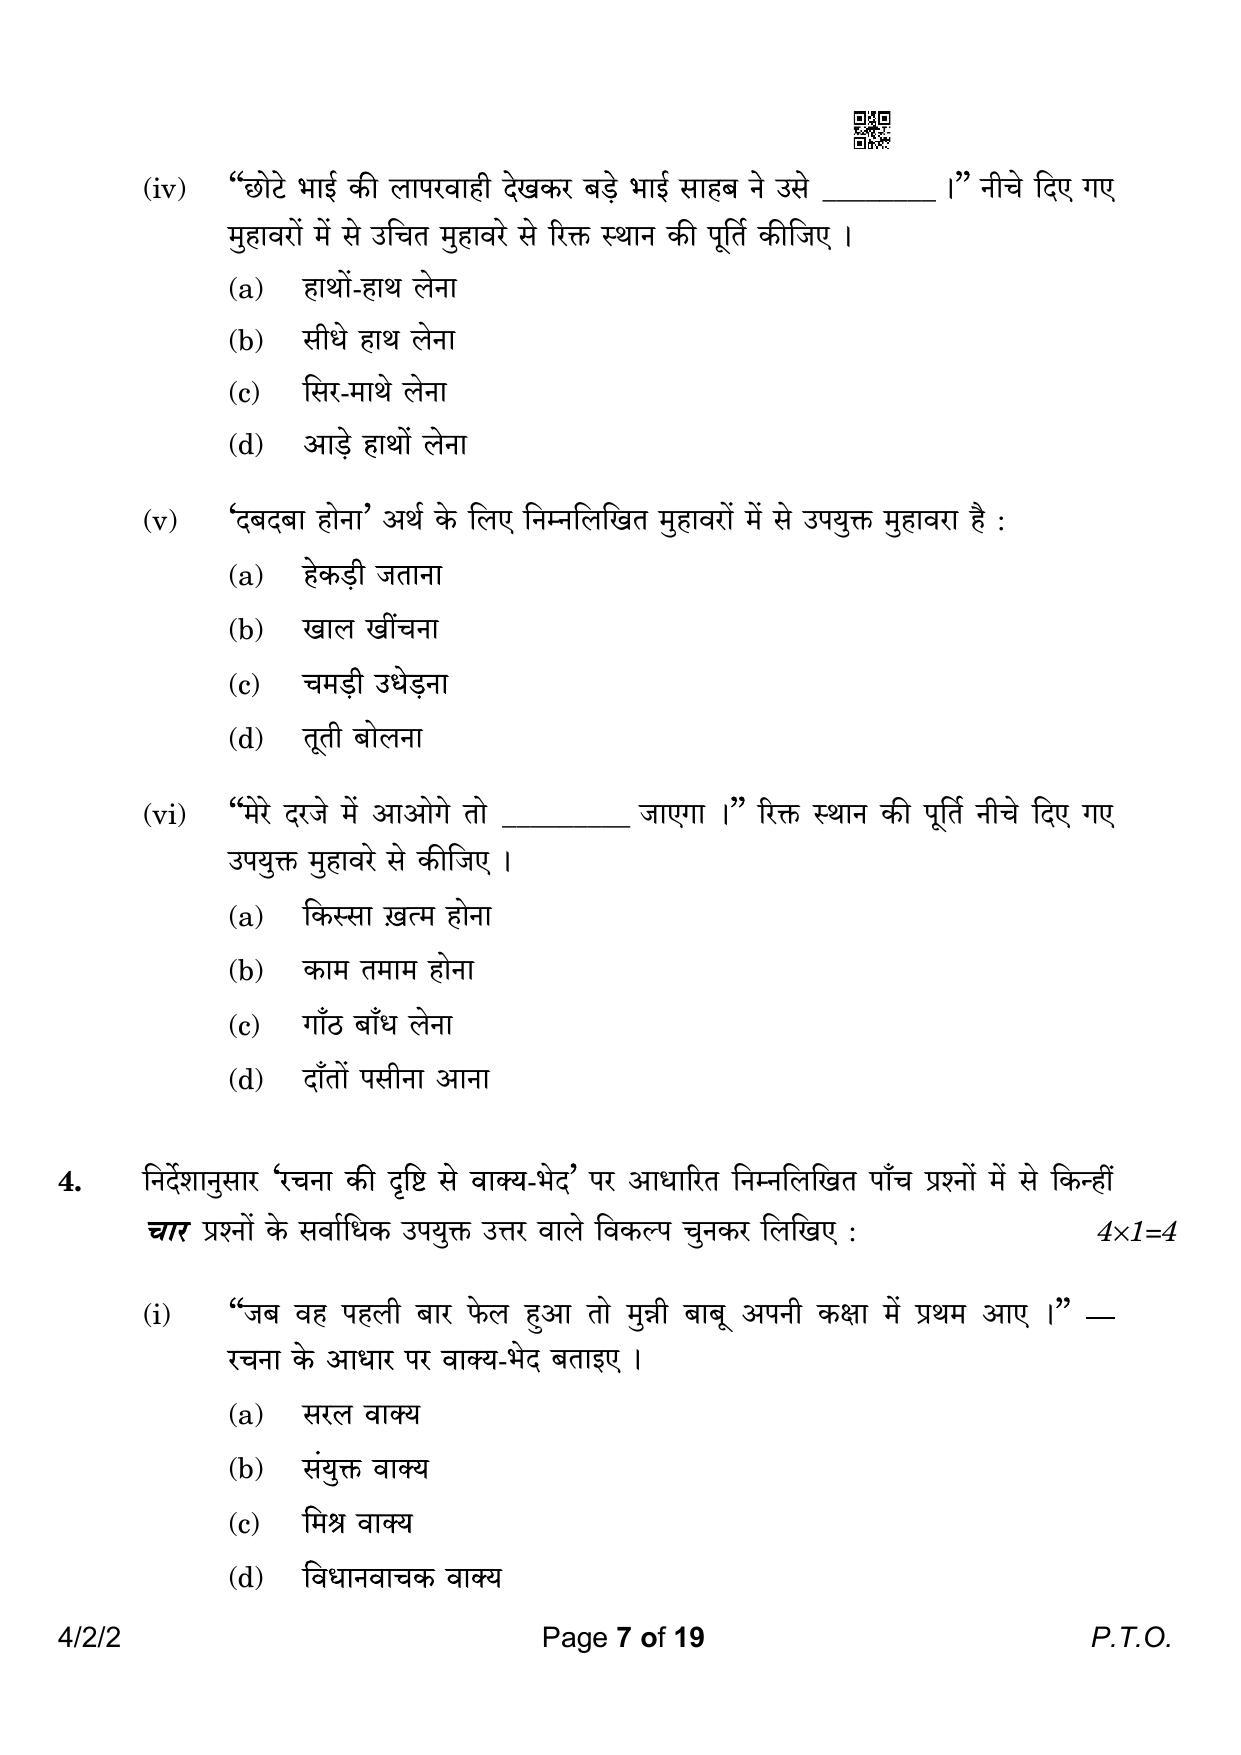 CBSE Class 10 4-2-2 Hindi B 2023 Question Paper - Page 7